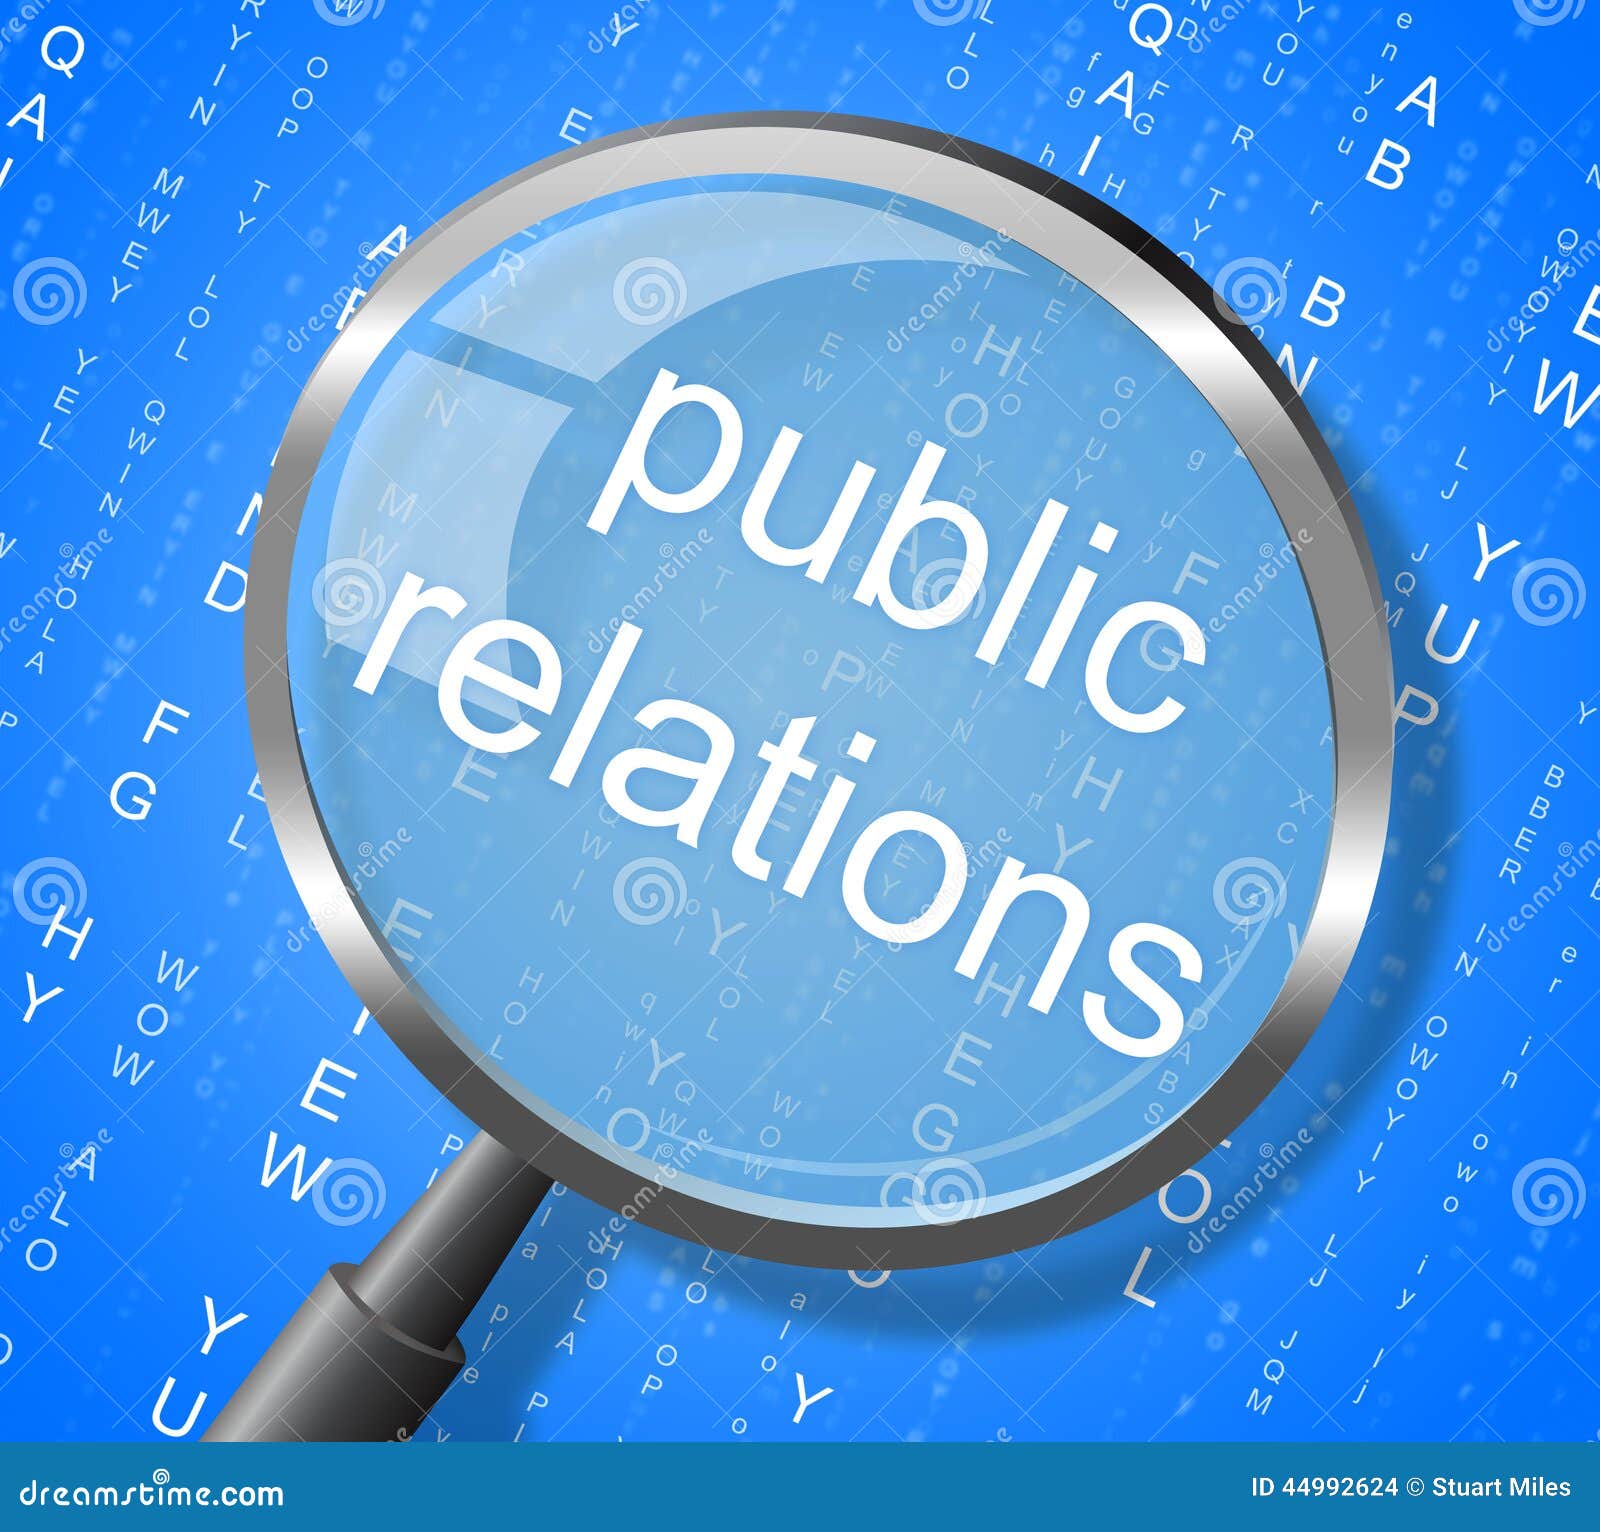 public relations means press release and magnification